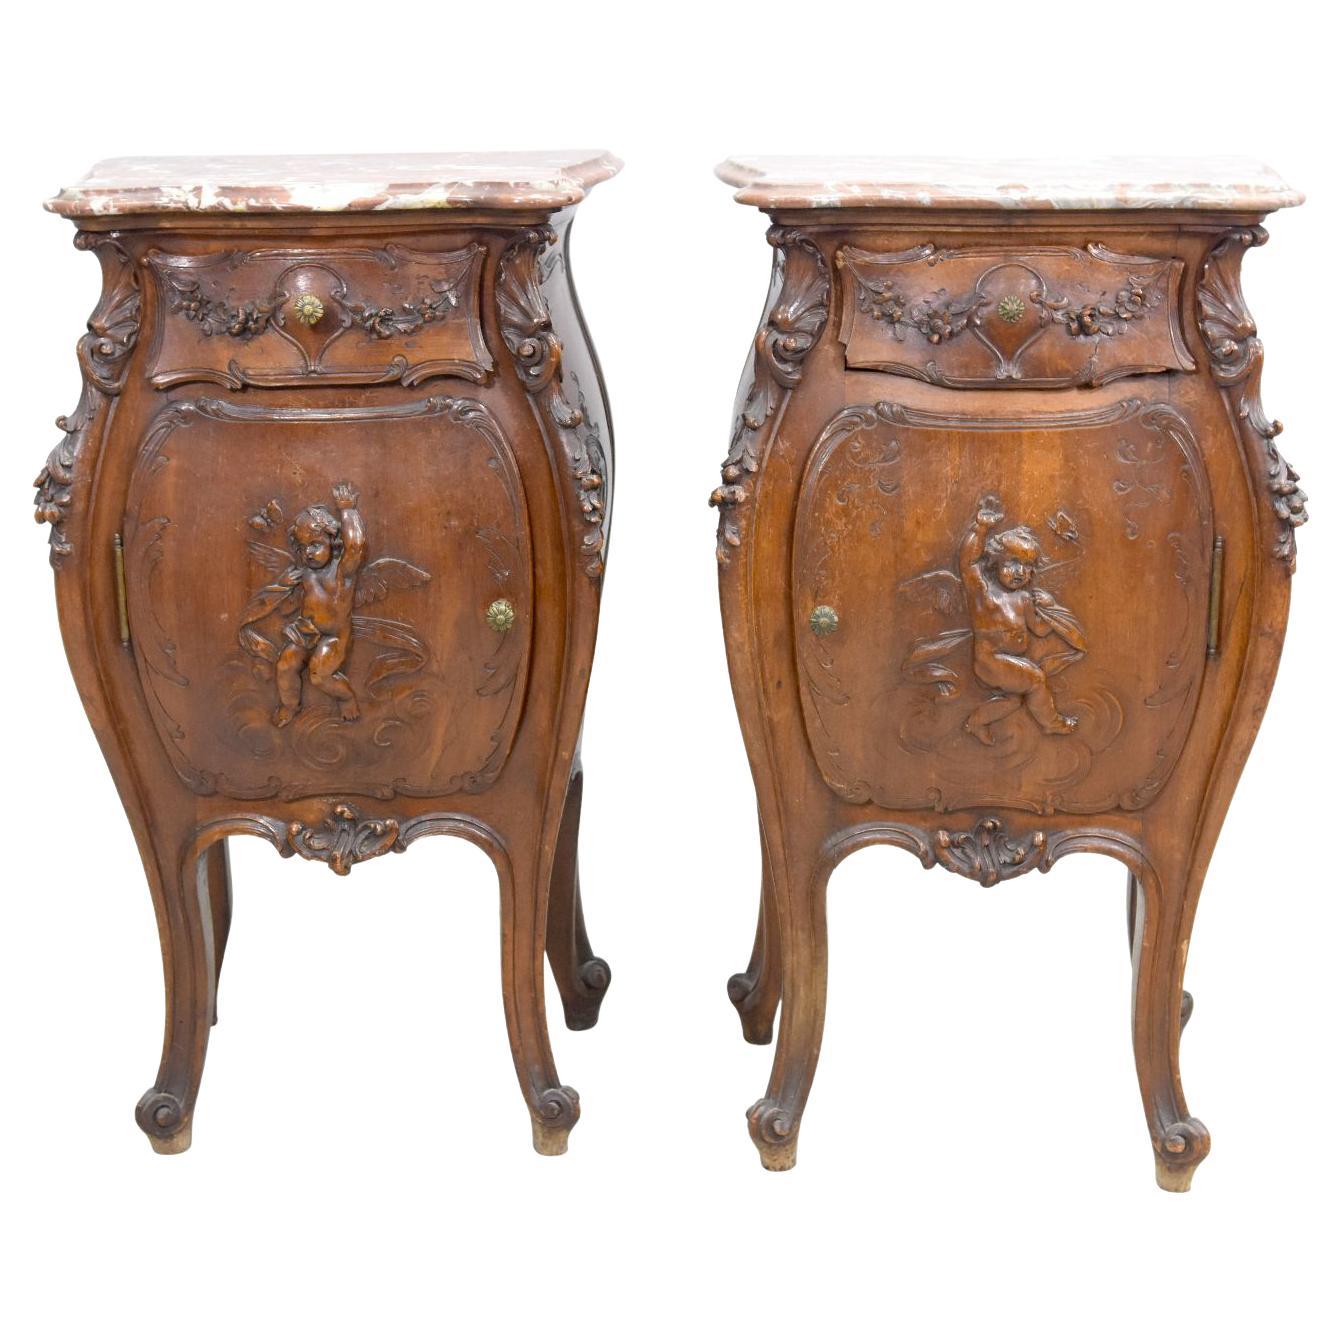 19th Baroque Louis XV Rococo Style Walnut Bedside Table with Putti